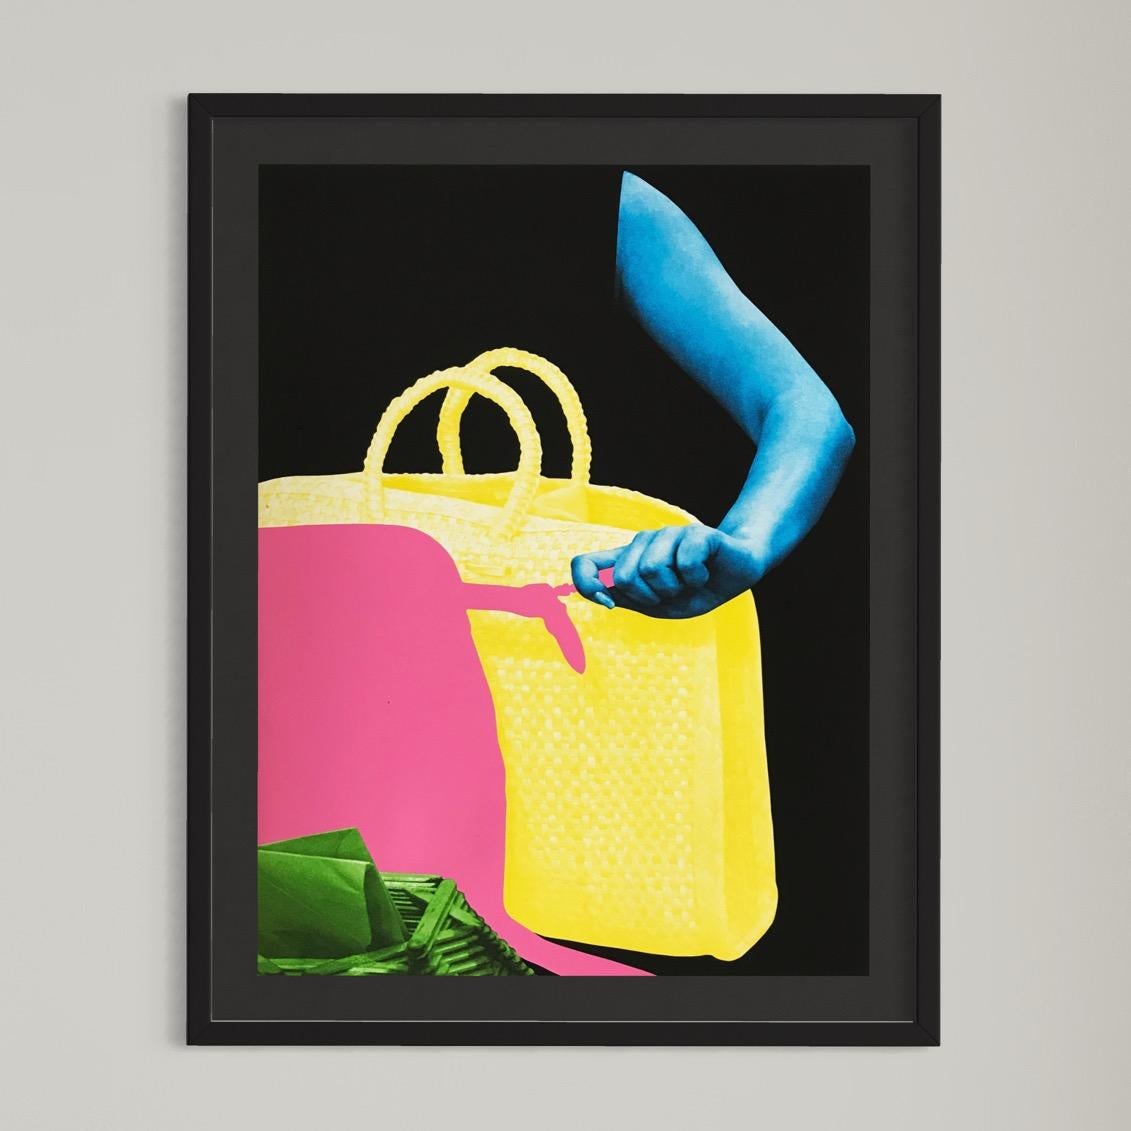 John Baldessari (American, born 1931)
Two Bags and Envelope Holder, 2011
Medium: Archival inkjet print
Dimensions: 61 x 45.8 cm
Edition of 40: Hand-signed and numbered
Condition: Excellent